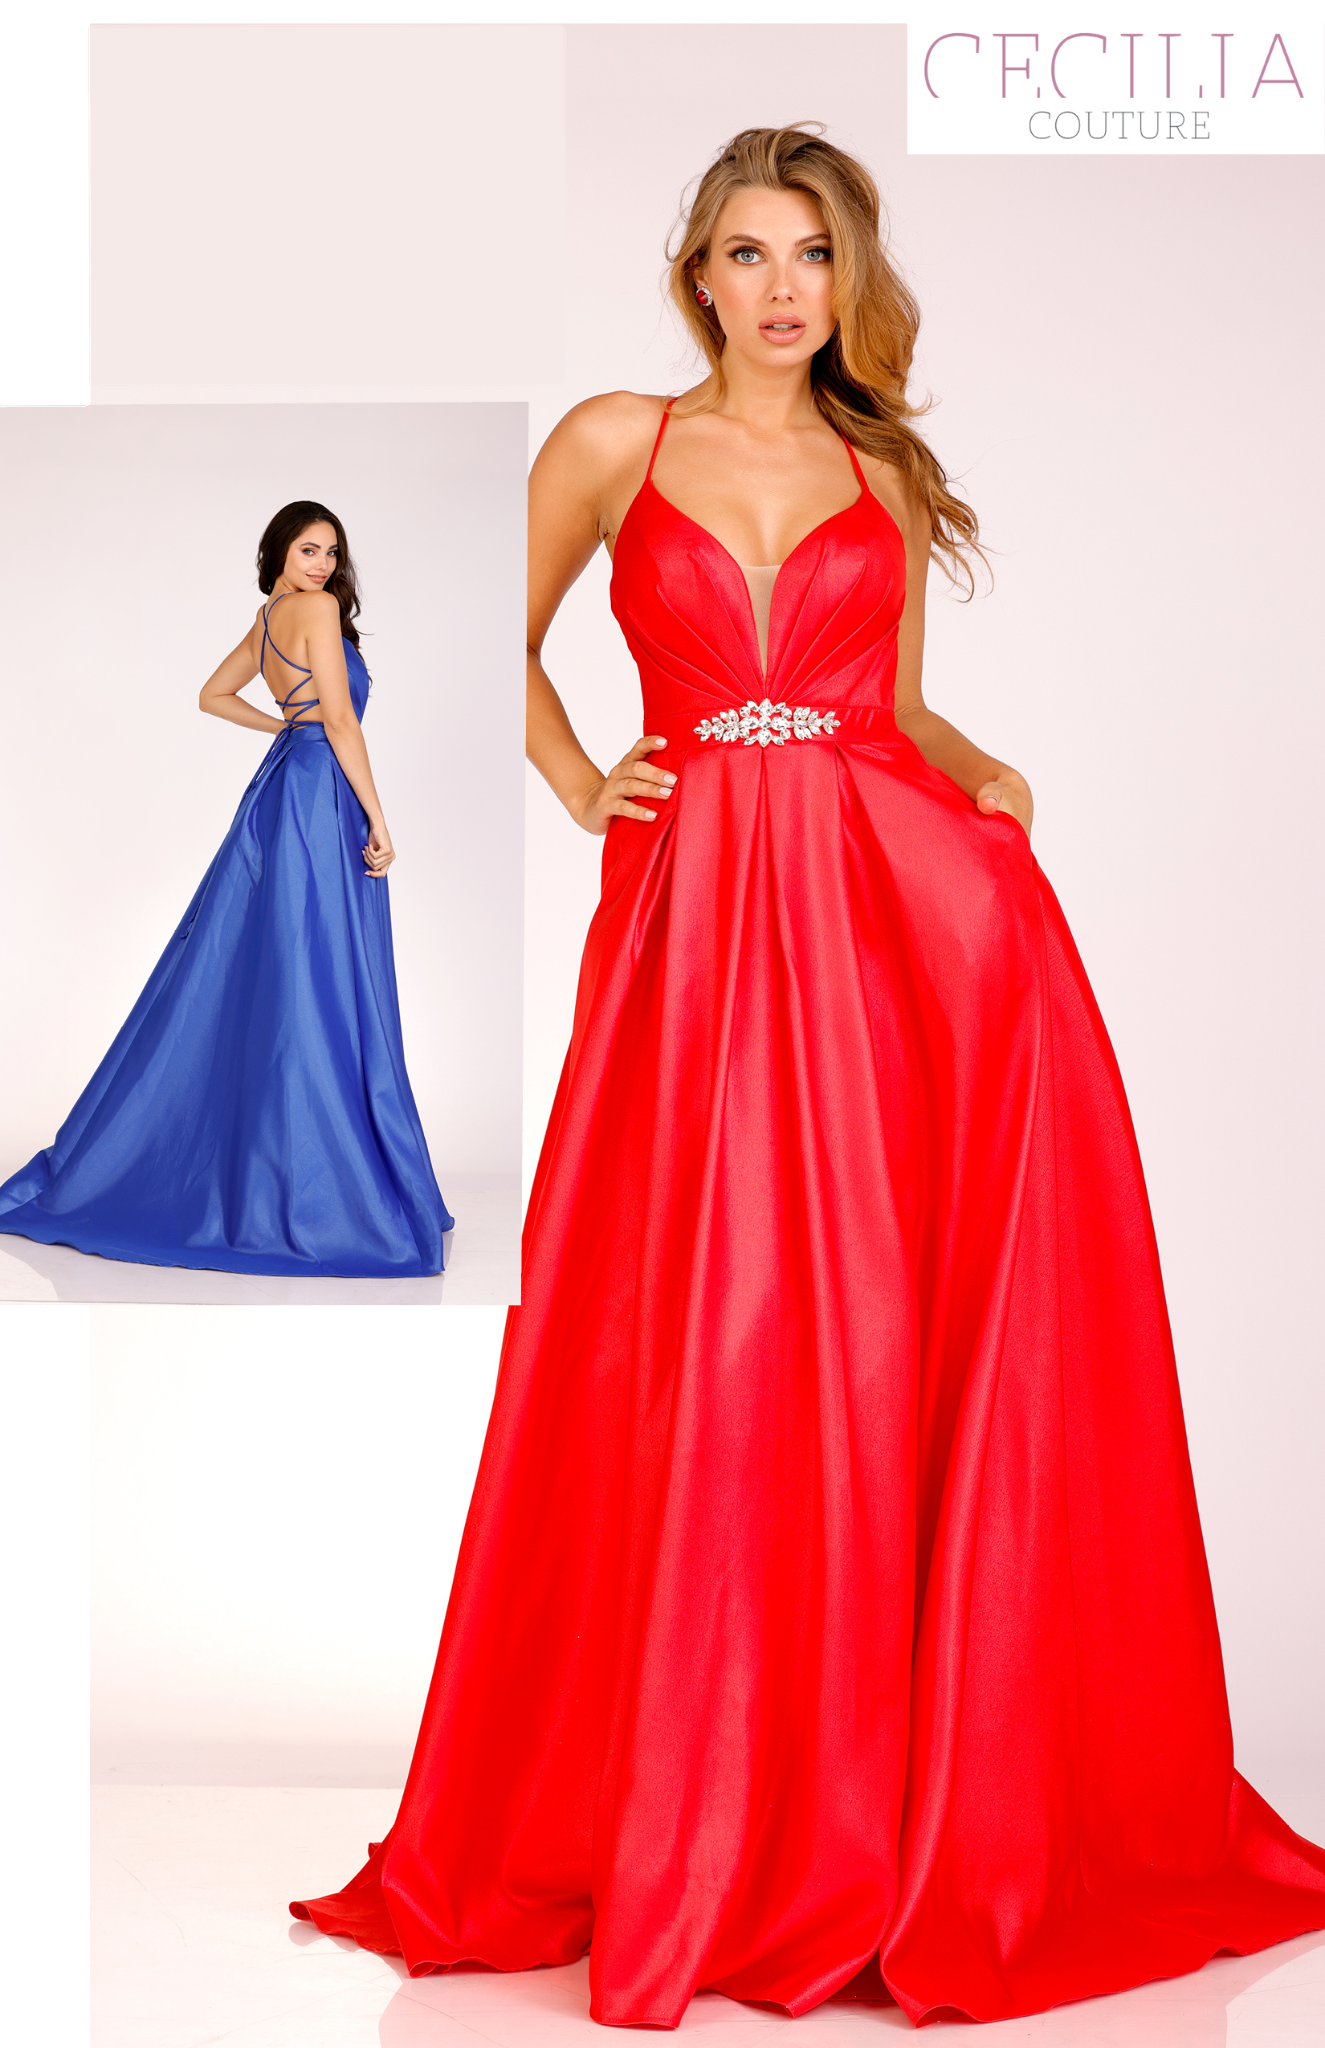 Cecilia Couture 1583 Hot Red Prom Dress